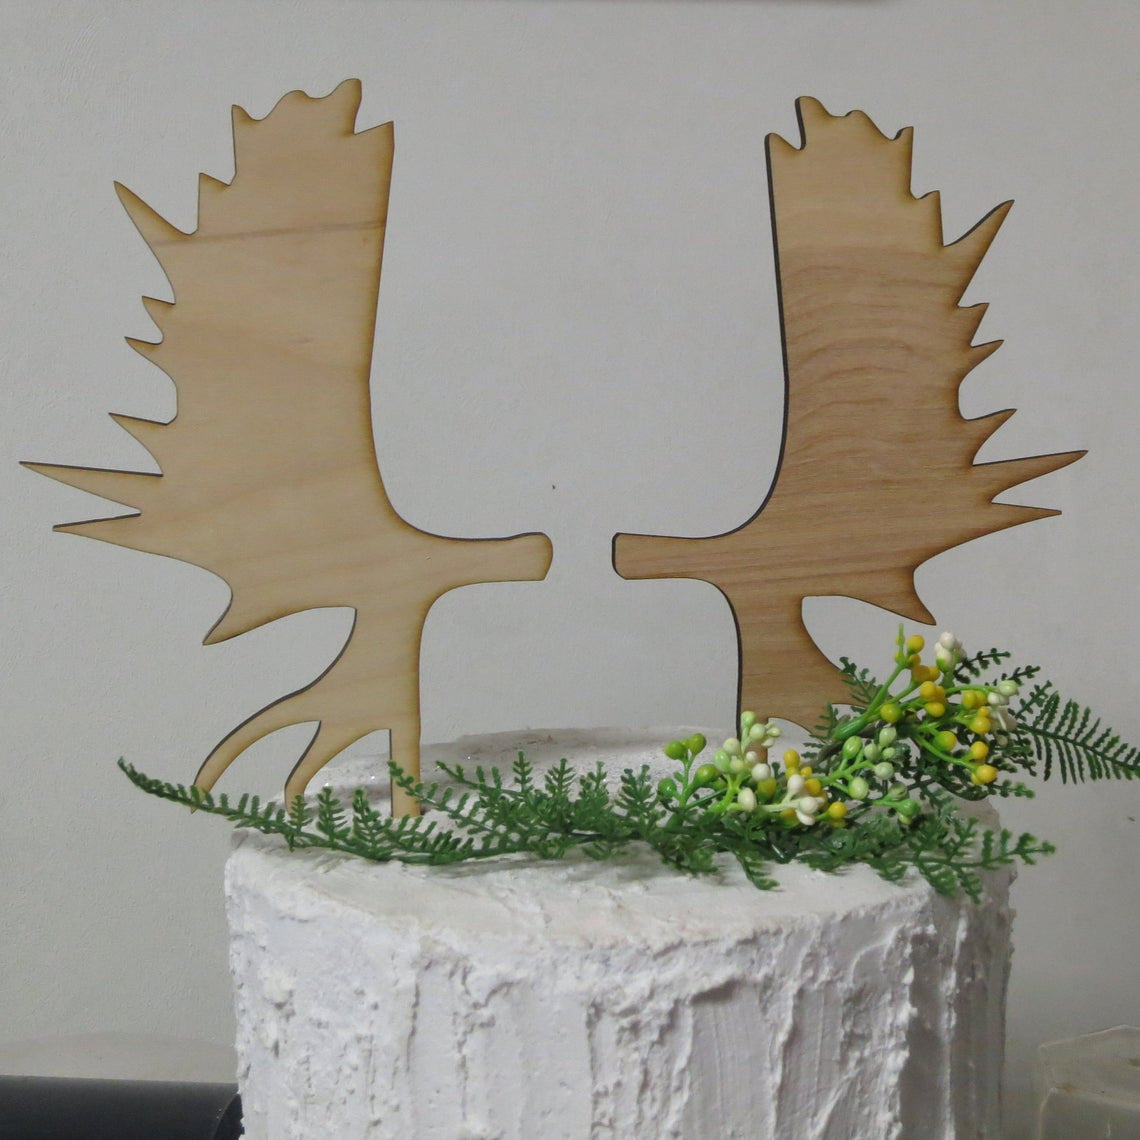 Moose Antler Wedding or Woodland Theme Birthday Cake Topper Rustic Country Outdoor Celebration